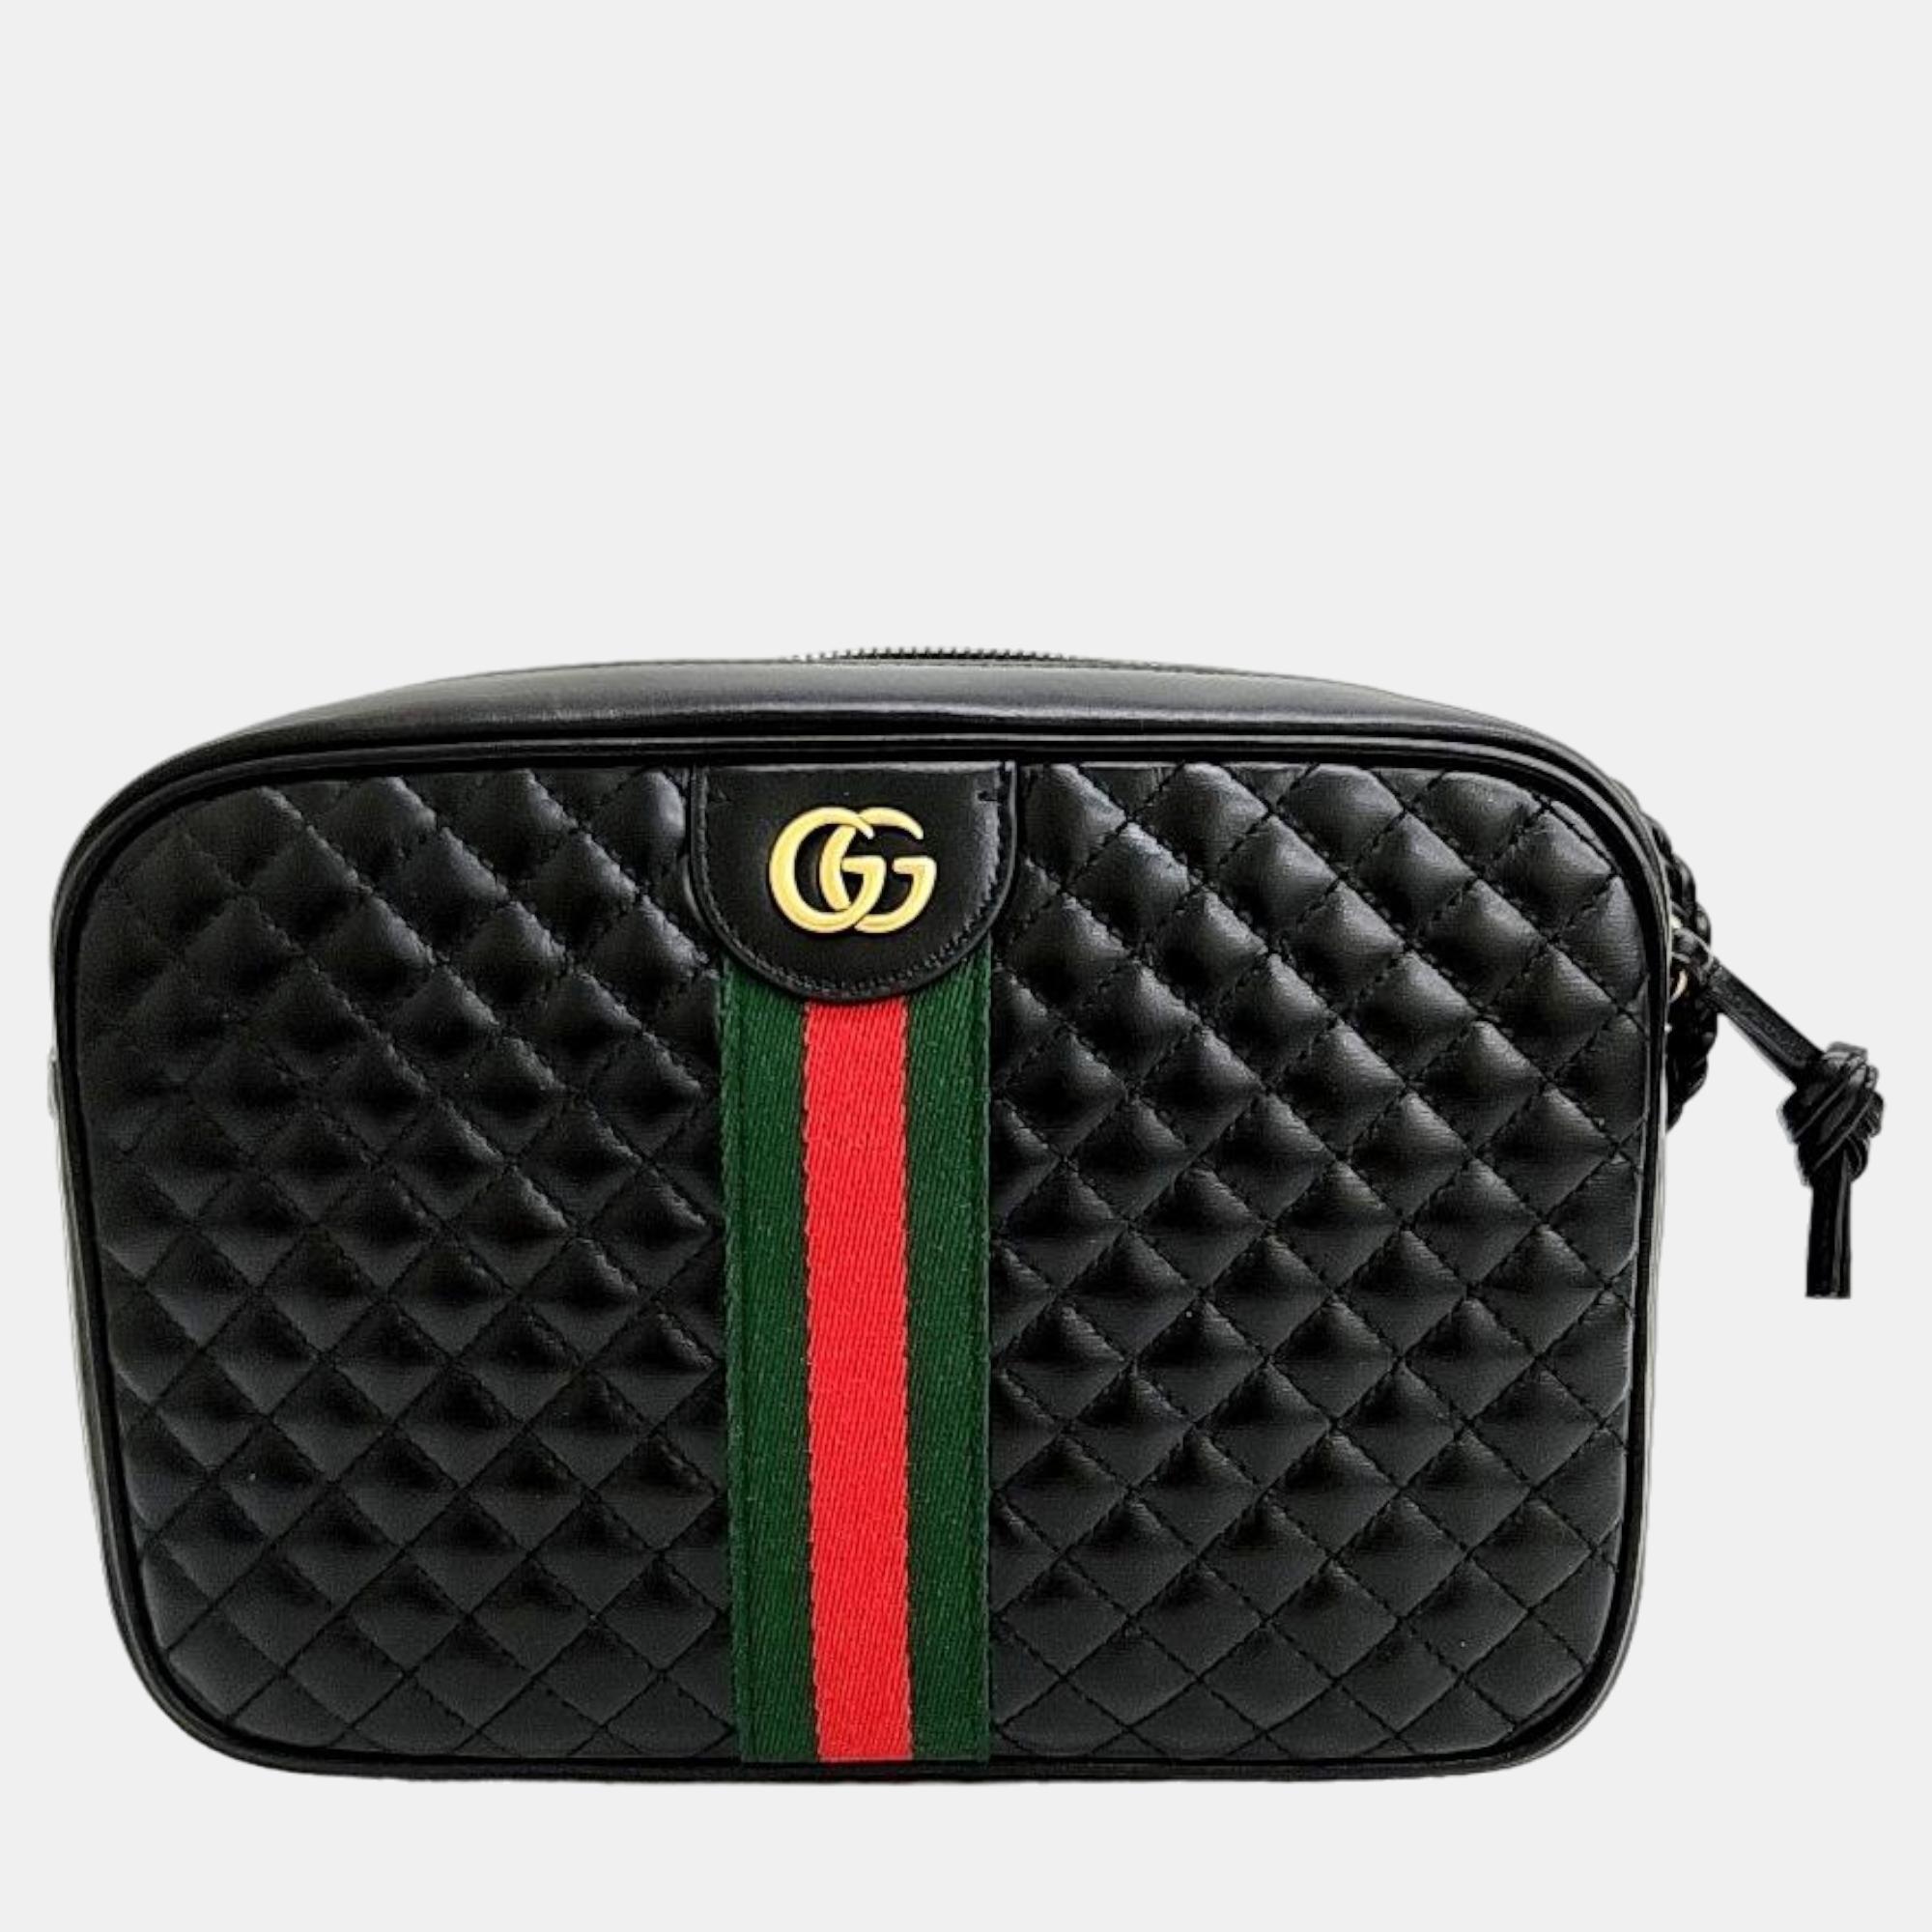 Gucci quilted web cross bag (541051)